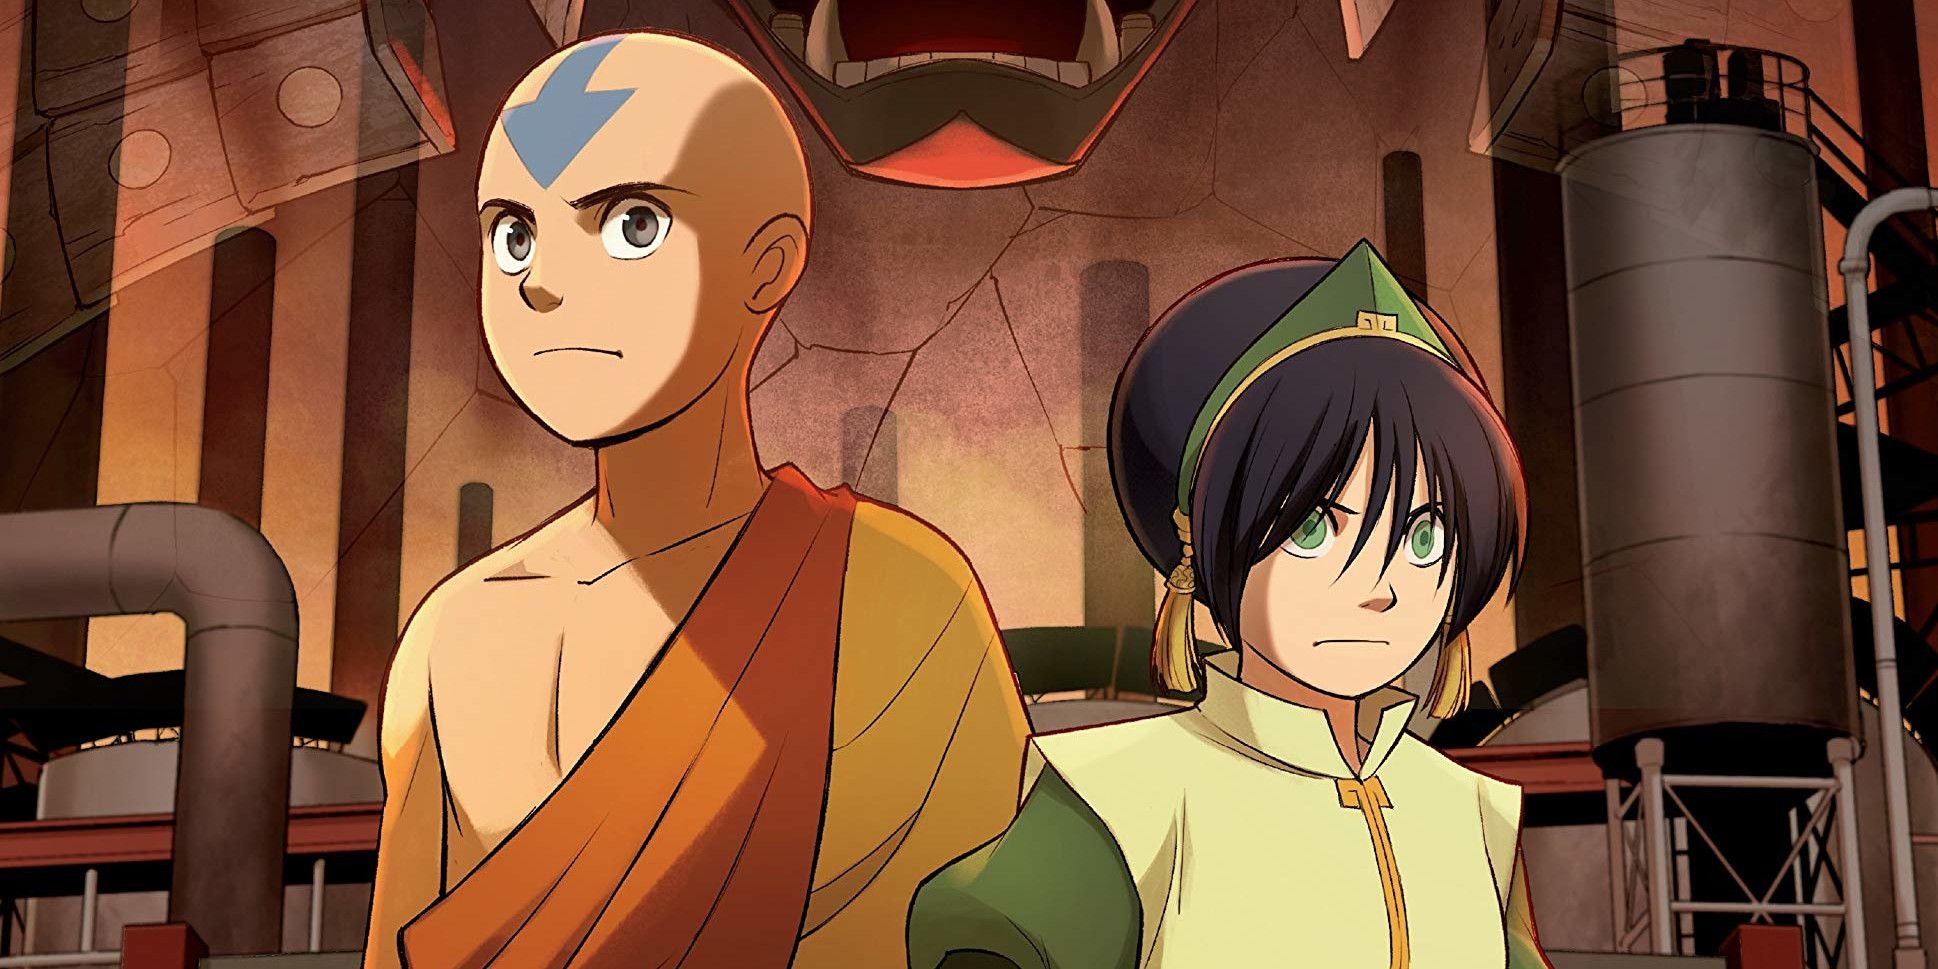 Aang and Toph standing next to each other from Avatar: The Last Airbender - The Rift graphic novel.